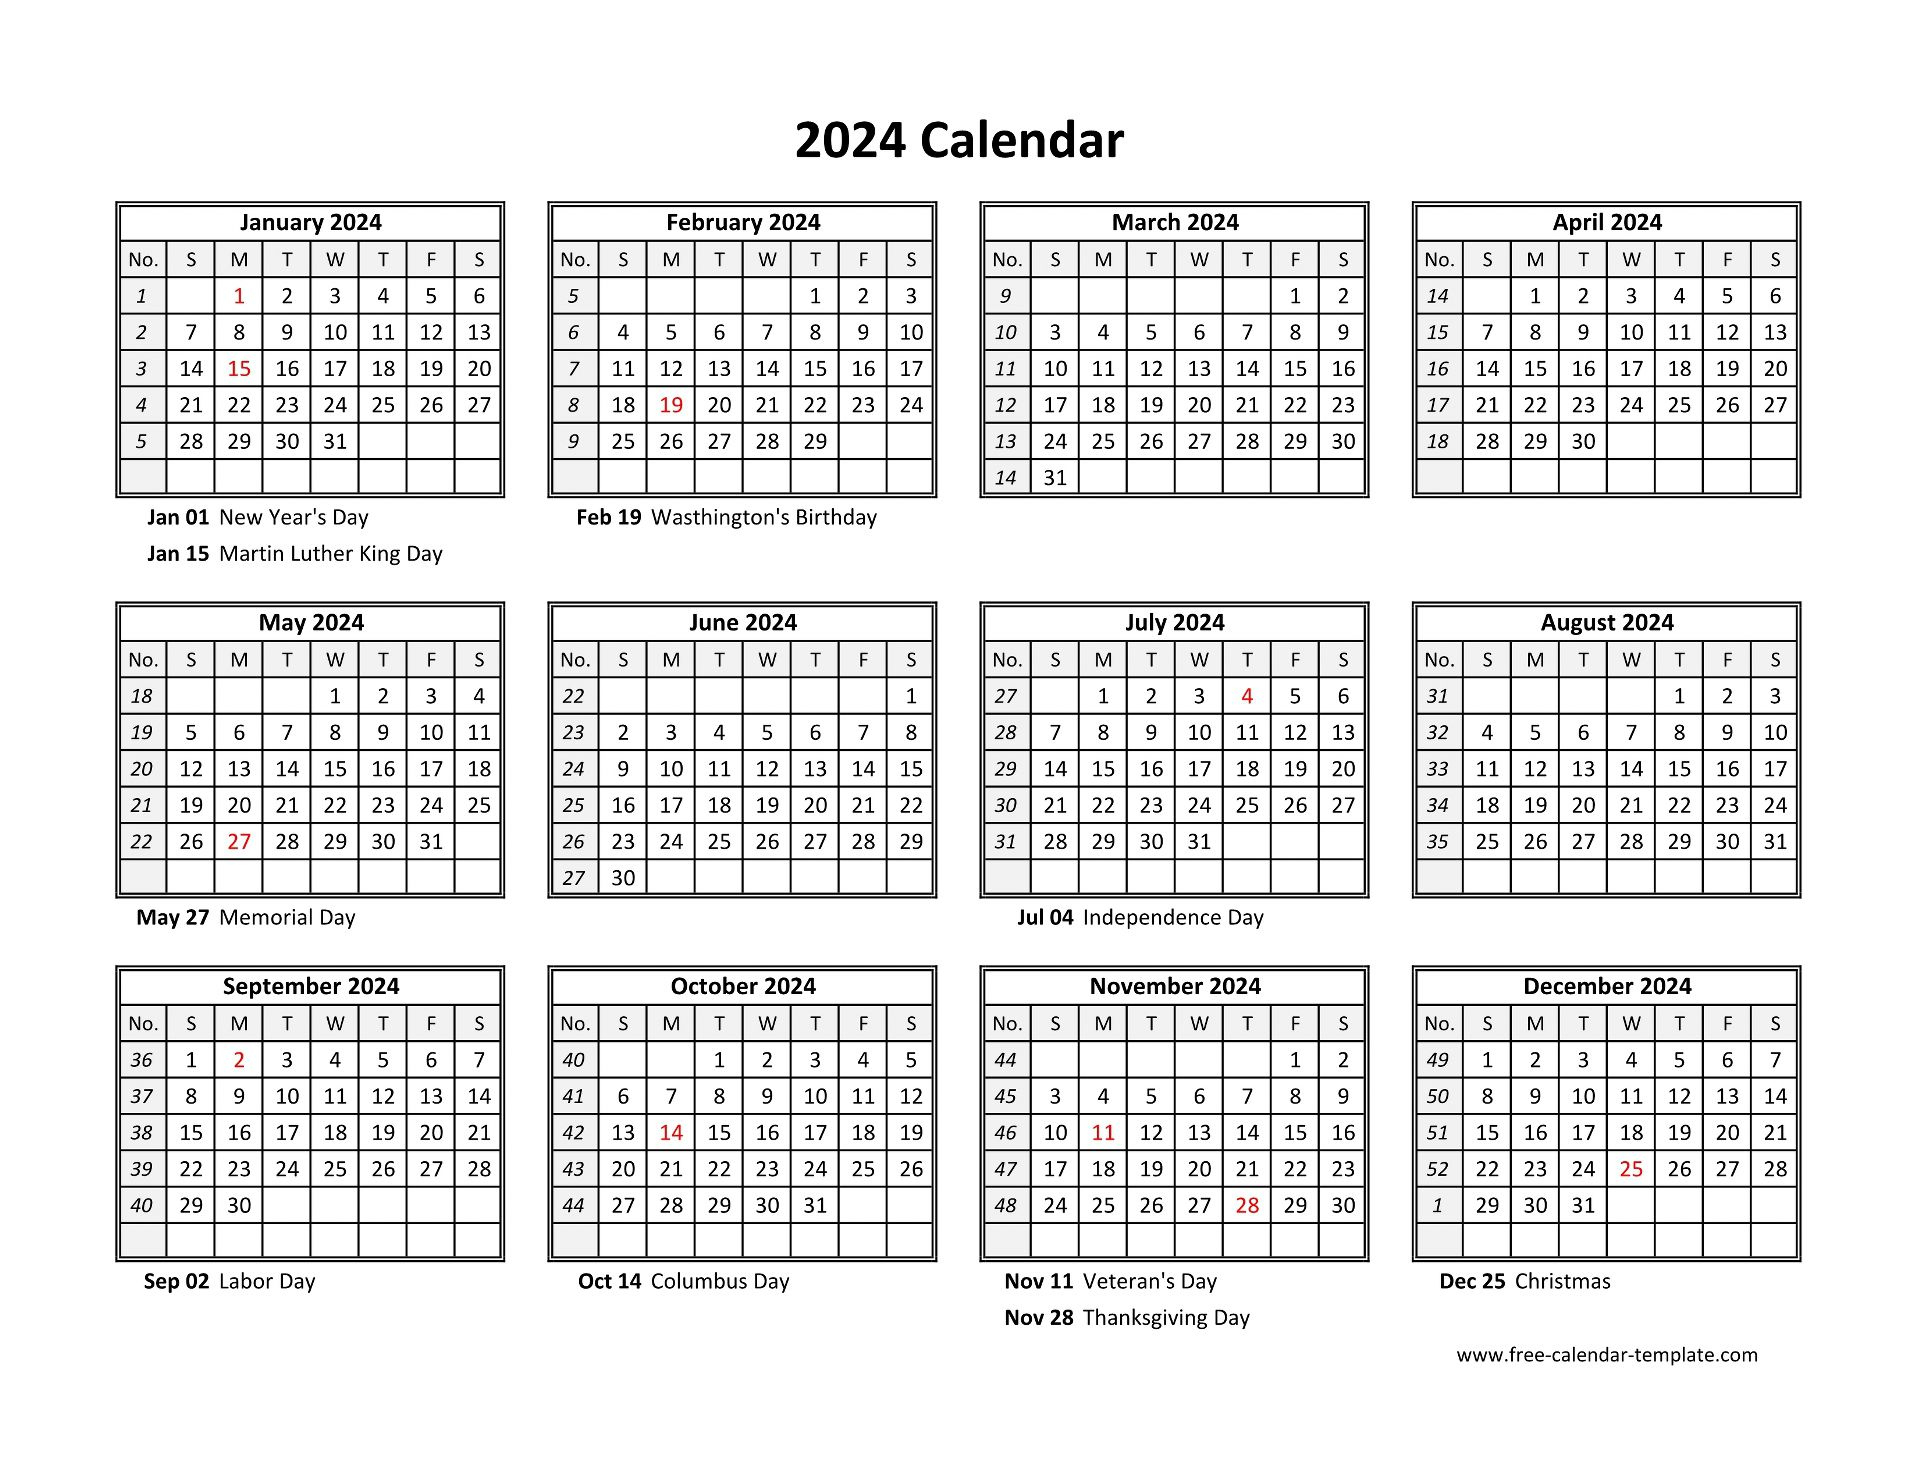 Yearly Calendar 2024 Printable With Federal Holidays | Free | Printable Calendar 2024 Whole Year